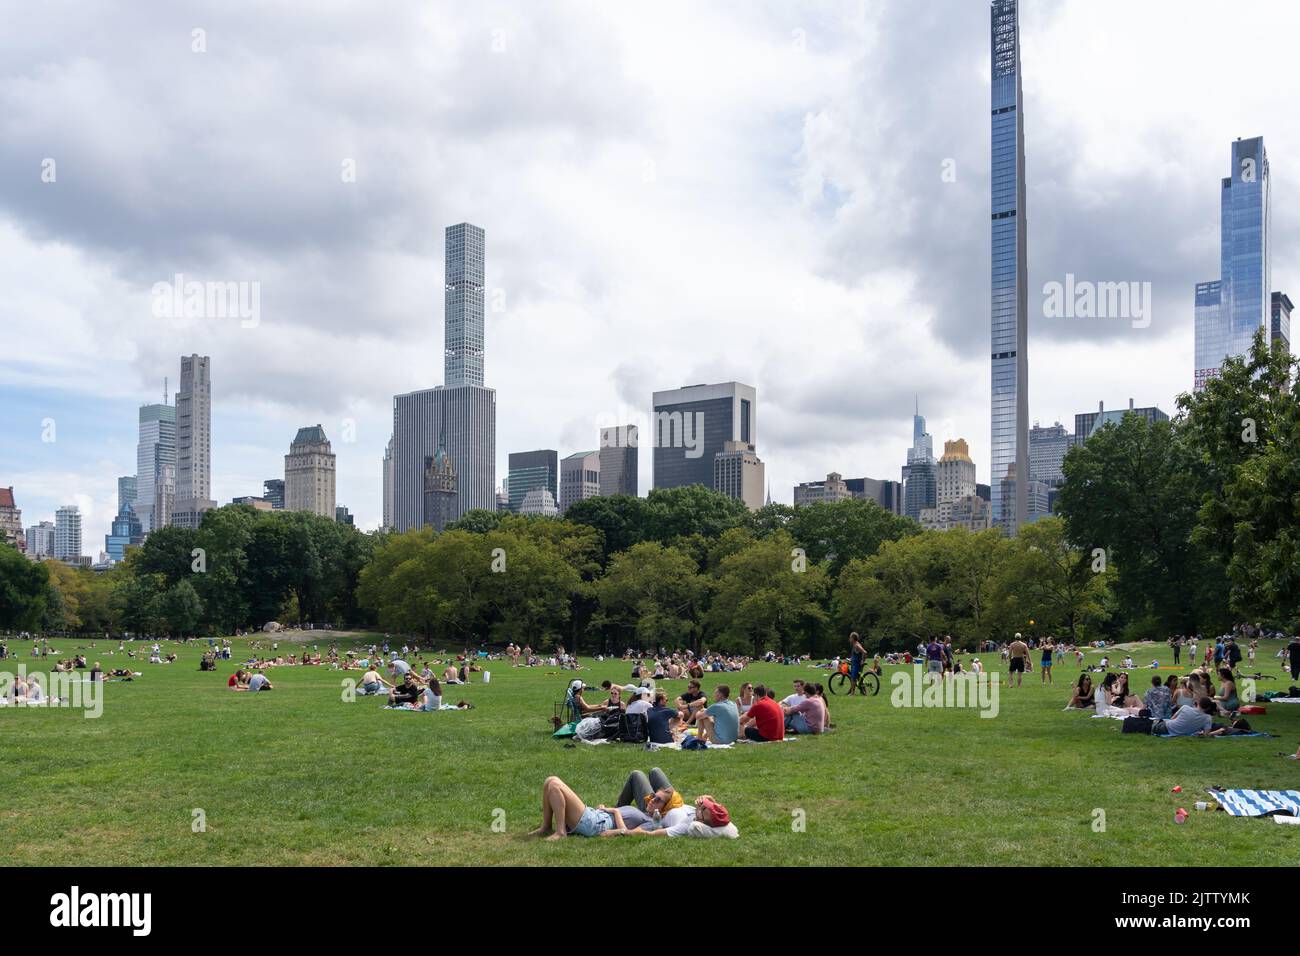 New York City, USA - August 21, 2022: People relaxing on the grass at Sheep Meadow of Central Park with buildings in the background in New York City. Stock Photo